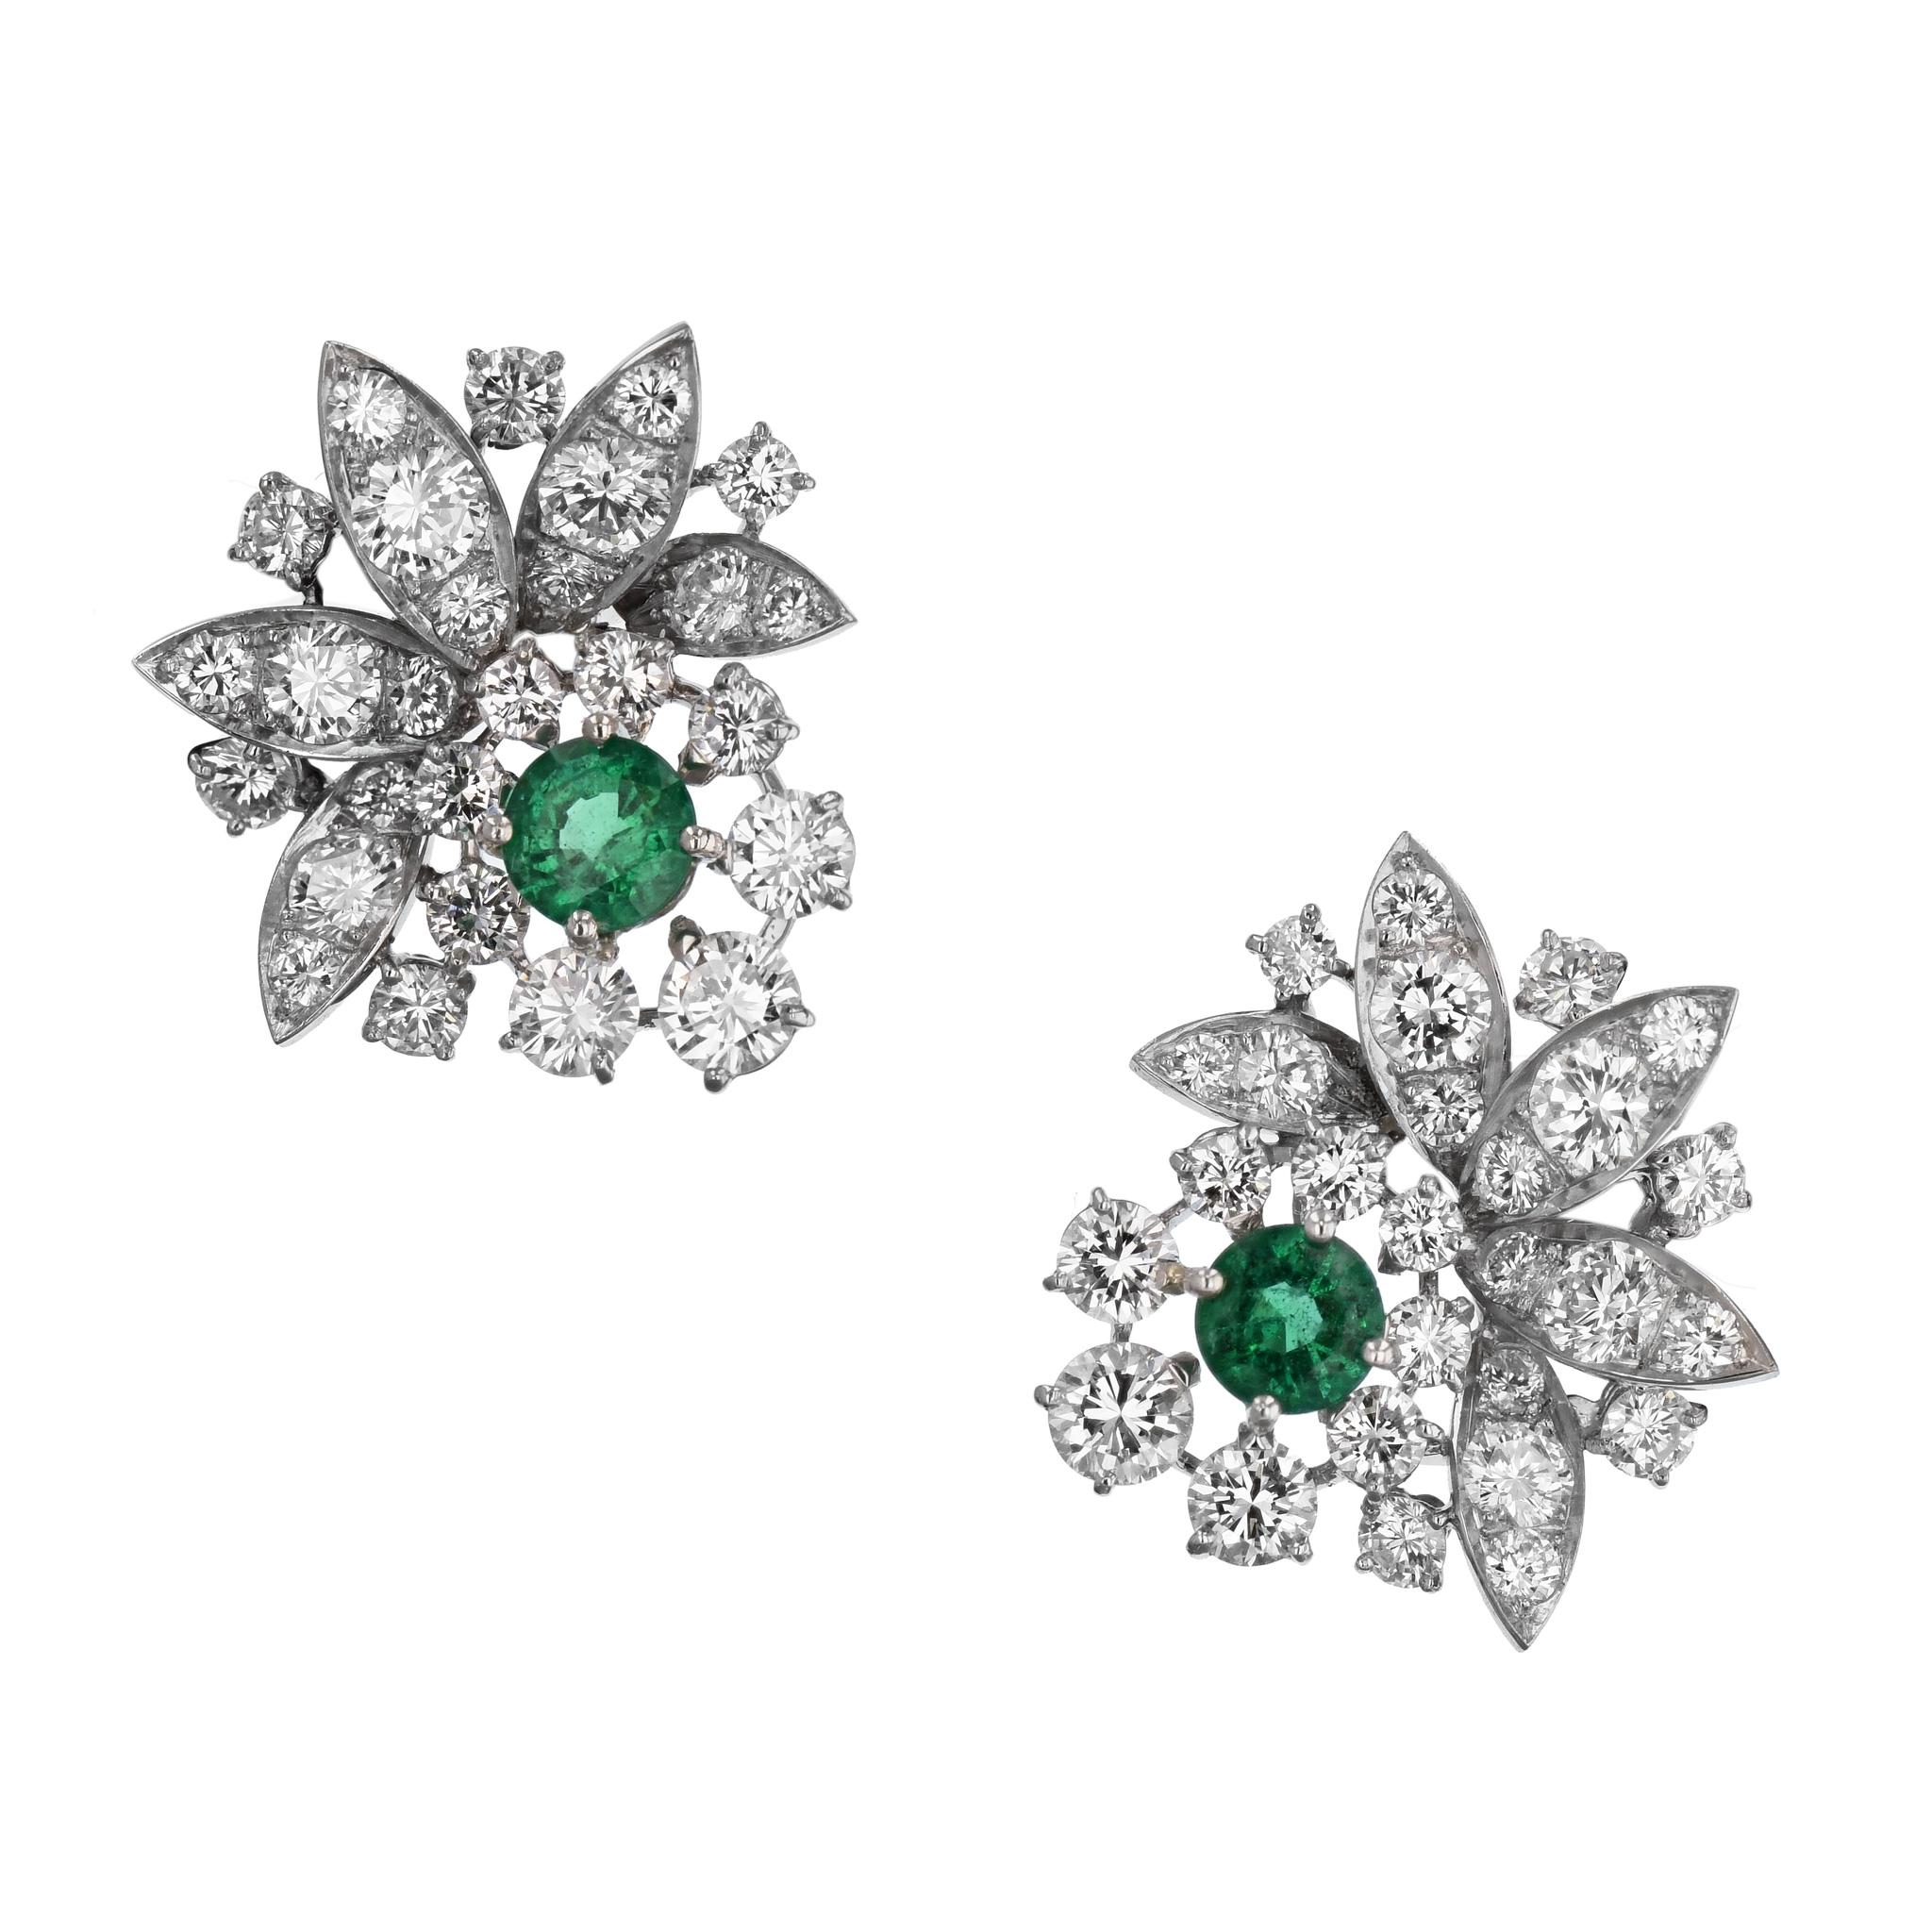 Estate Hollywood Zambian Emeralds Platinum Diamond Estate Earrings In Excellent Condition For Sale In Miami, FL